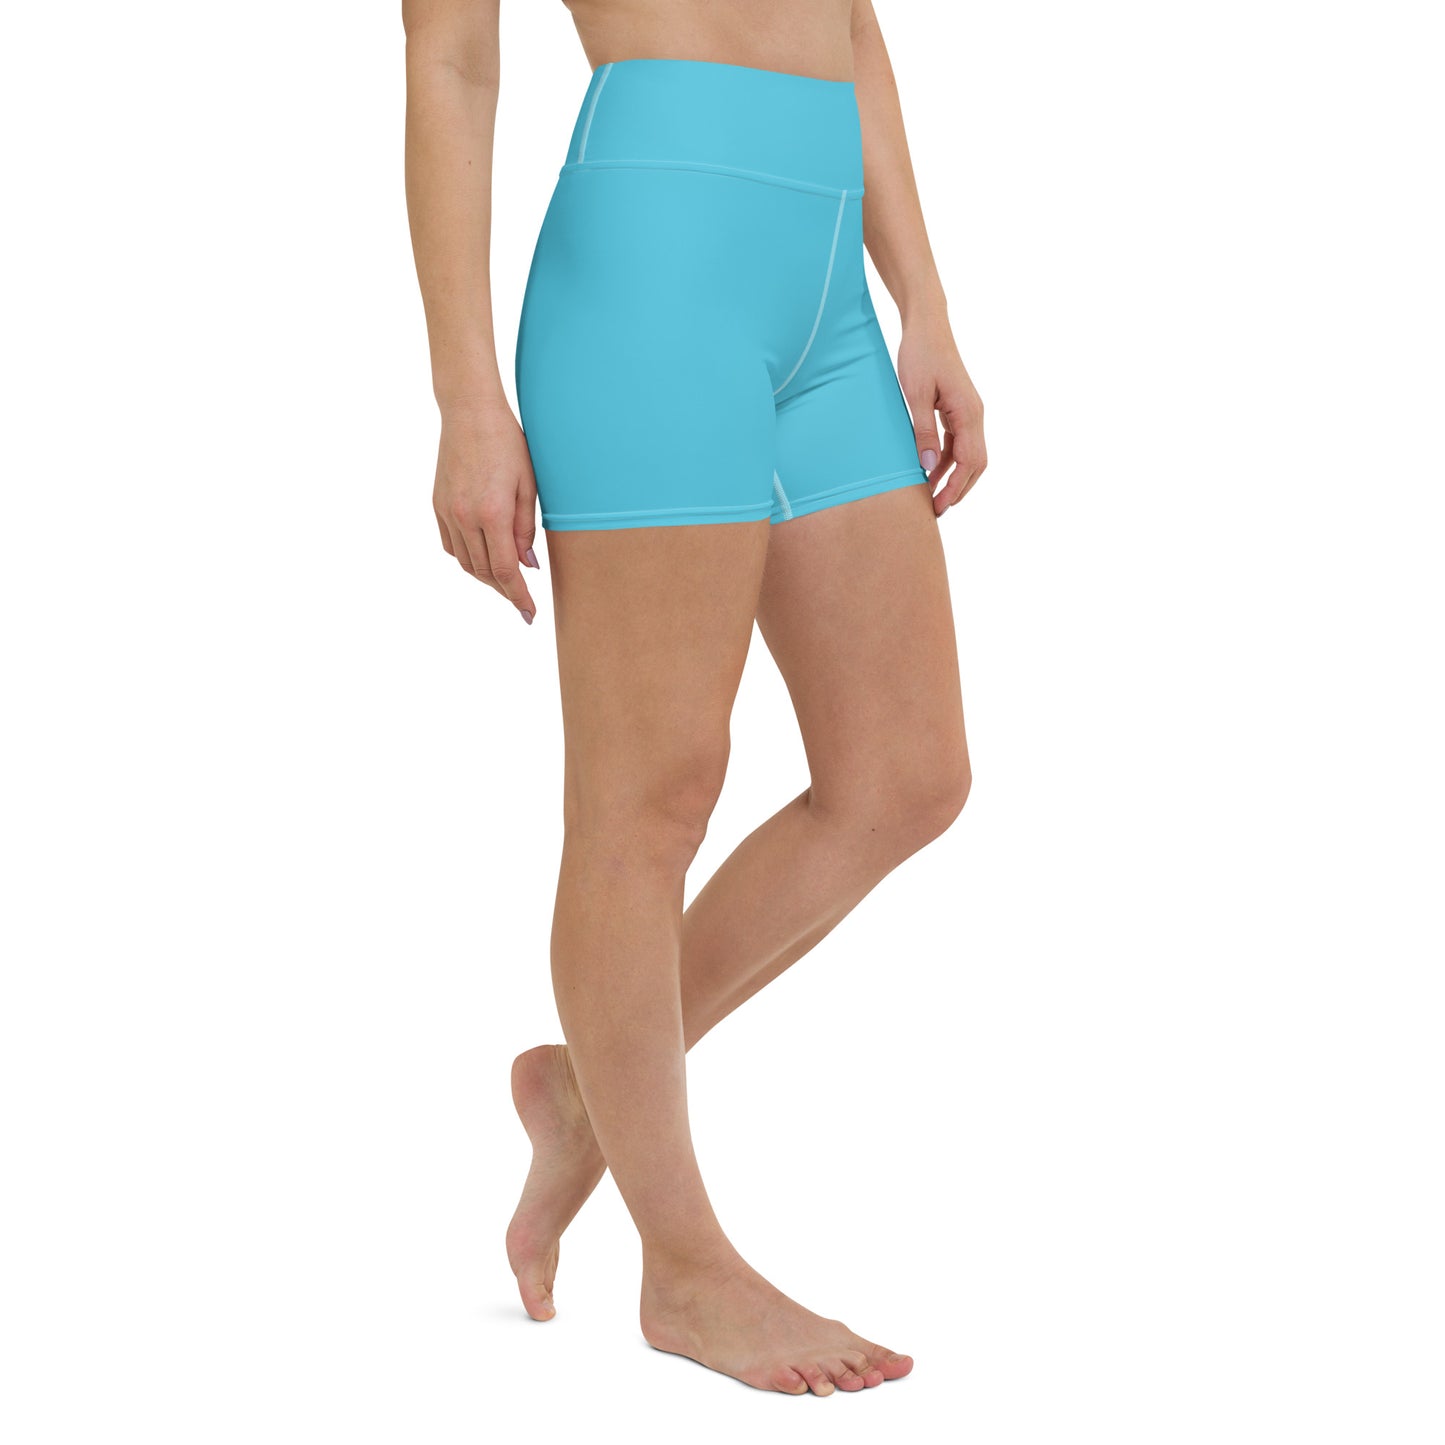 Malocchio Solid Color High Waist Yoga Shorts / Bike Shorts with Inside Pocket